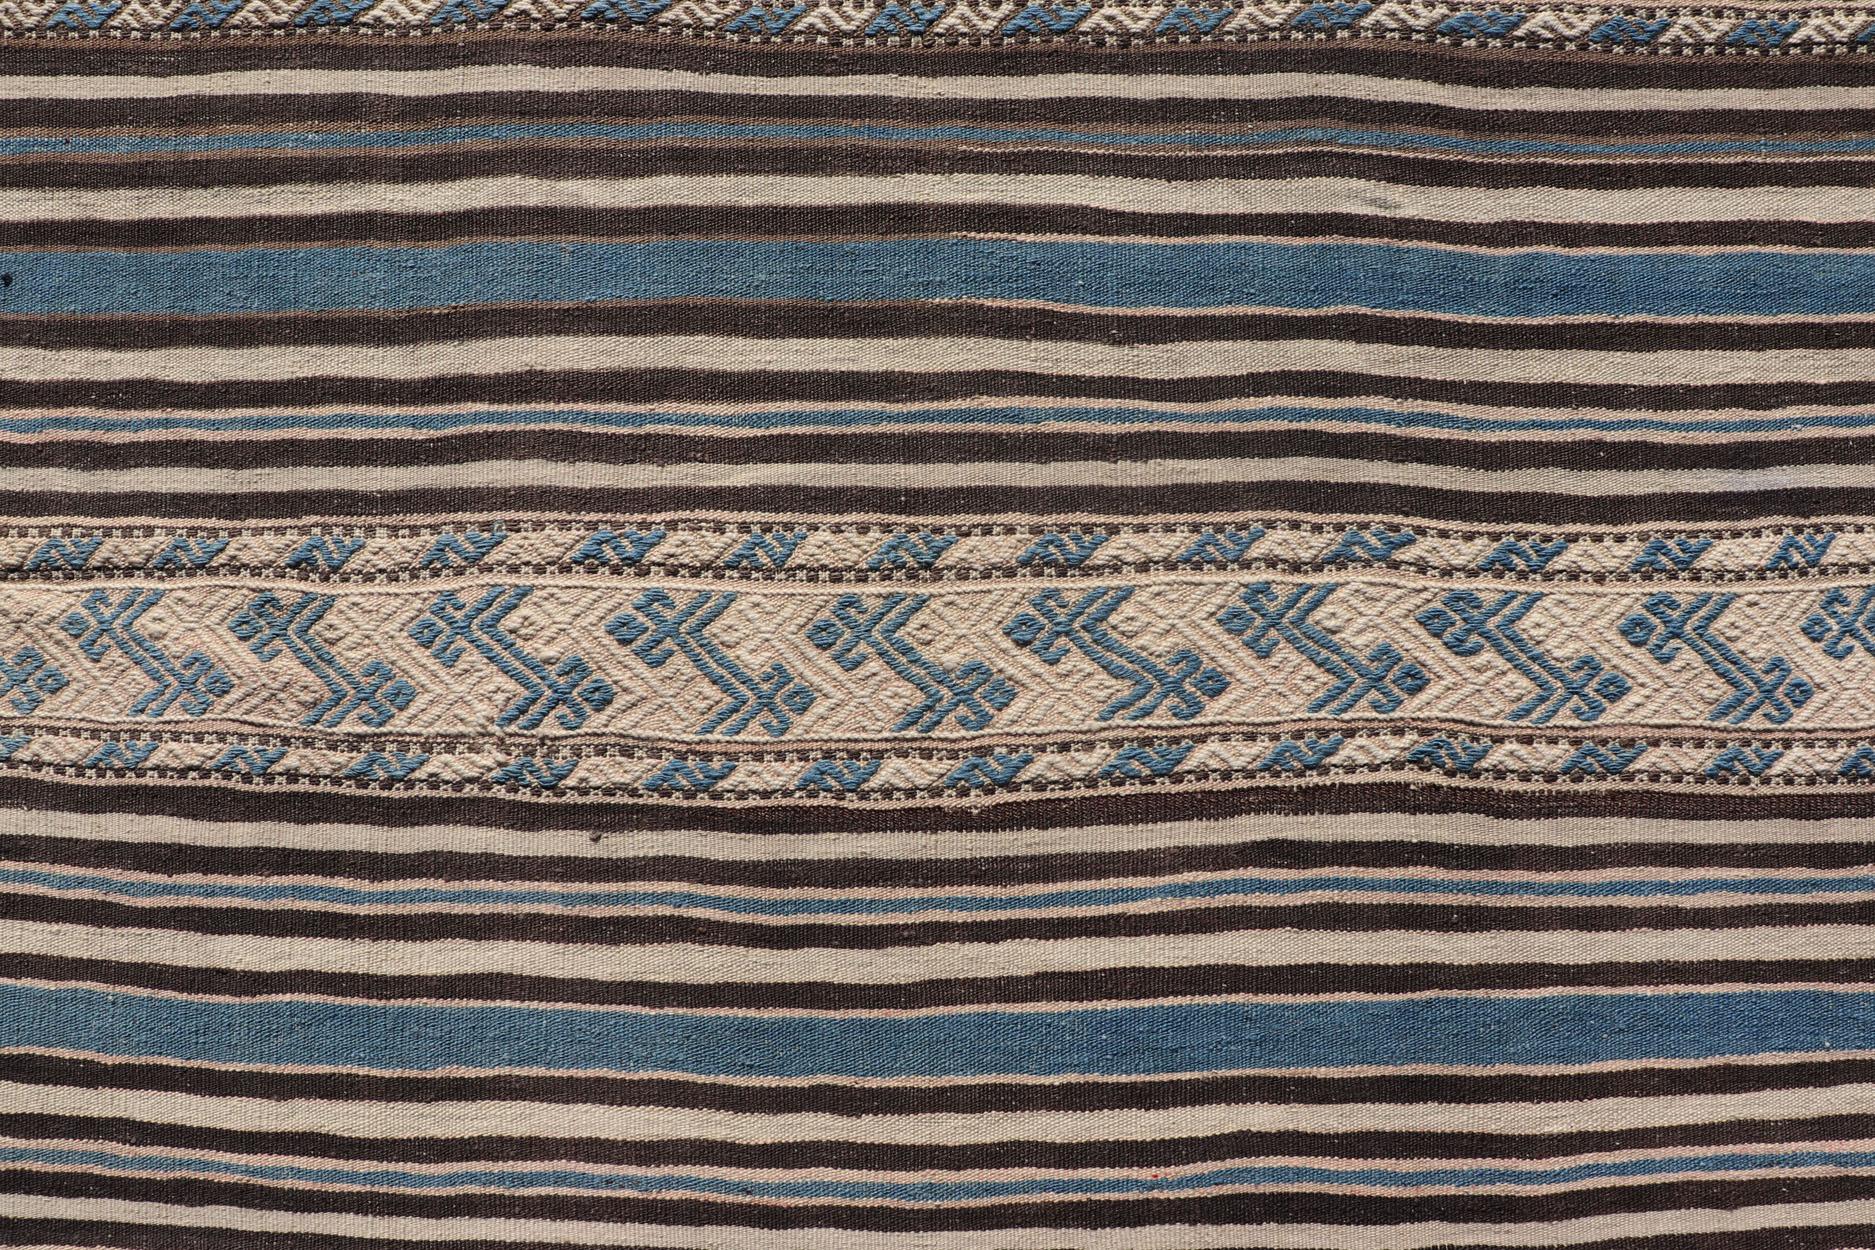 Turkish Vintage Flat-Weave with Striped Design and Tribal Motifs in Blue & Brown For Sale 2